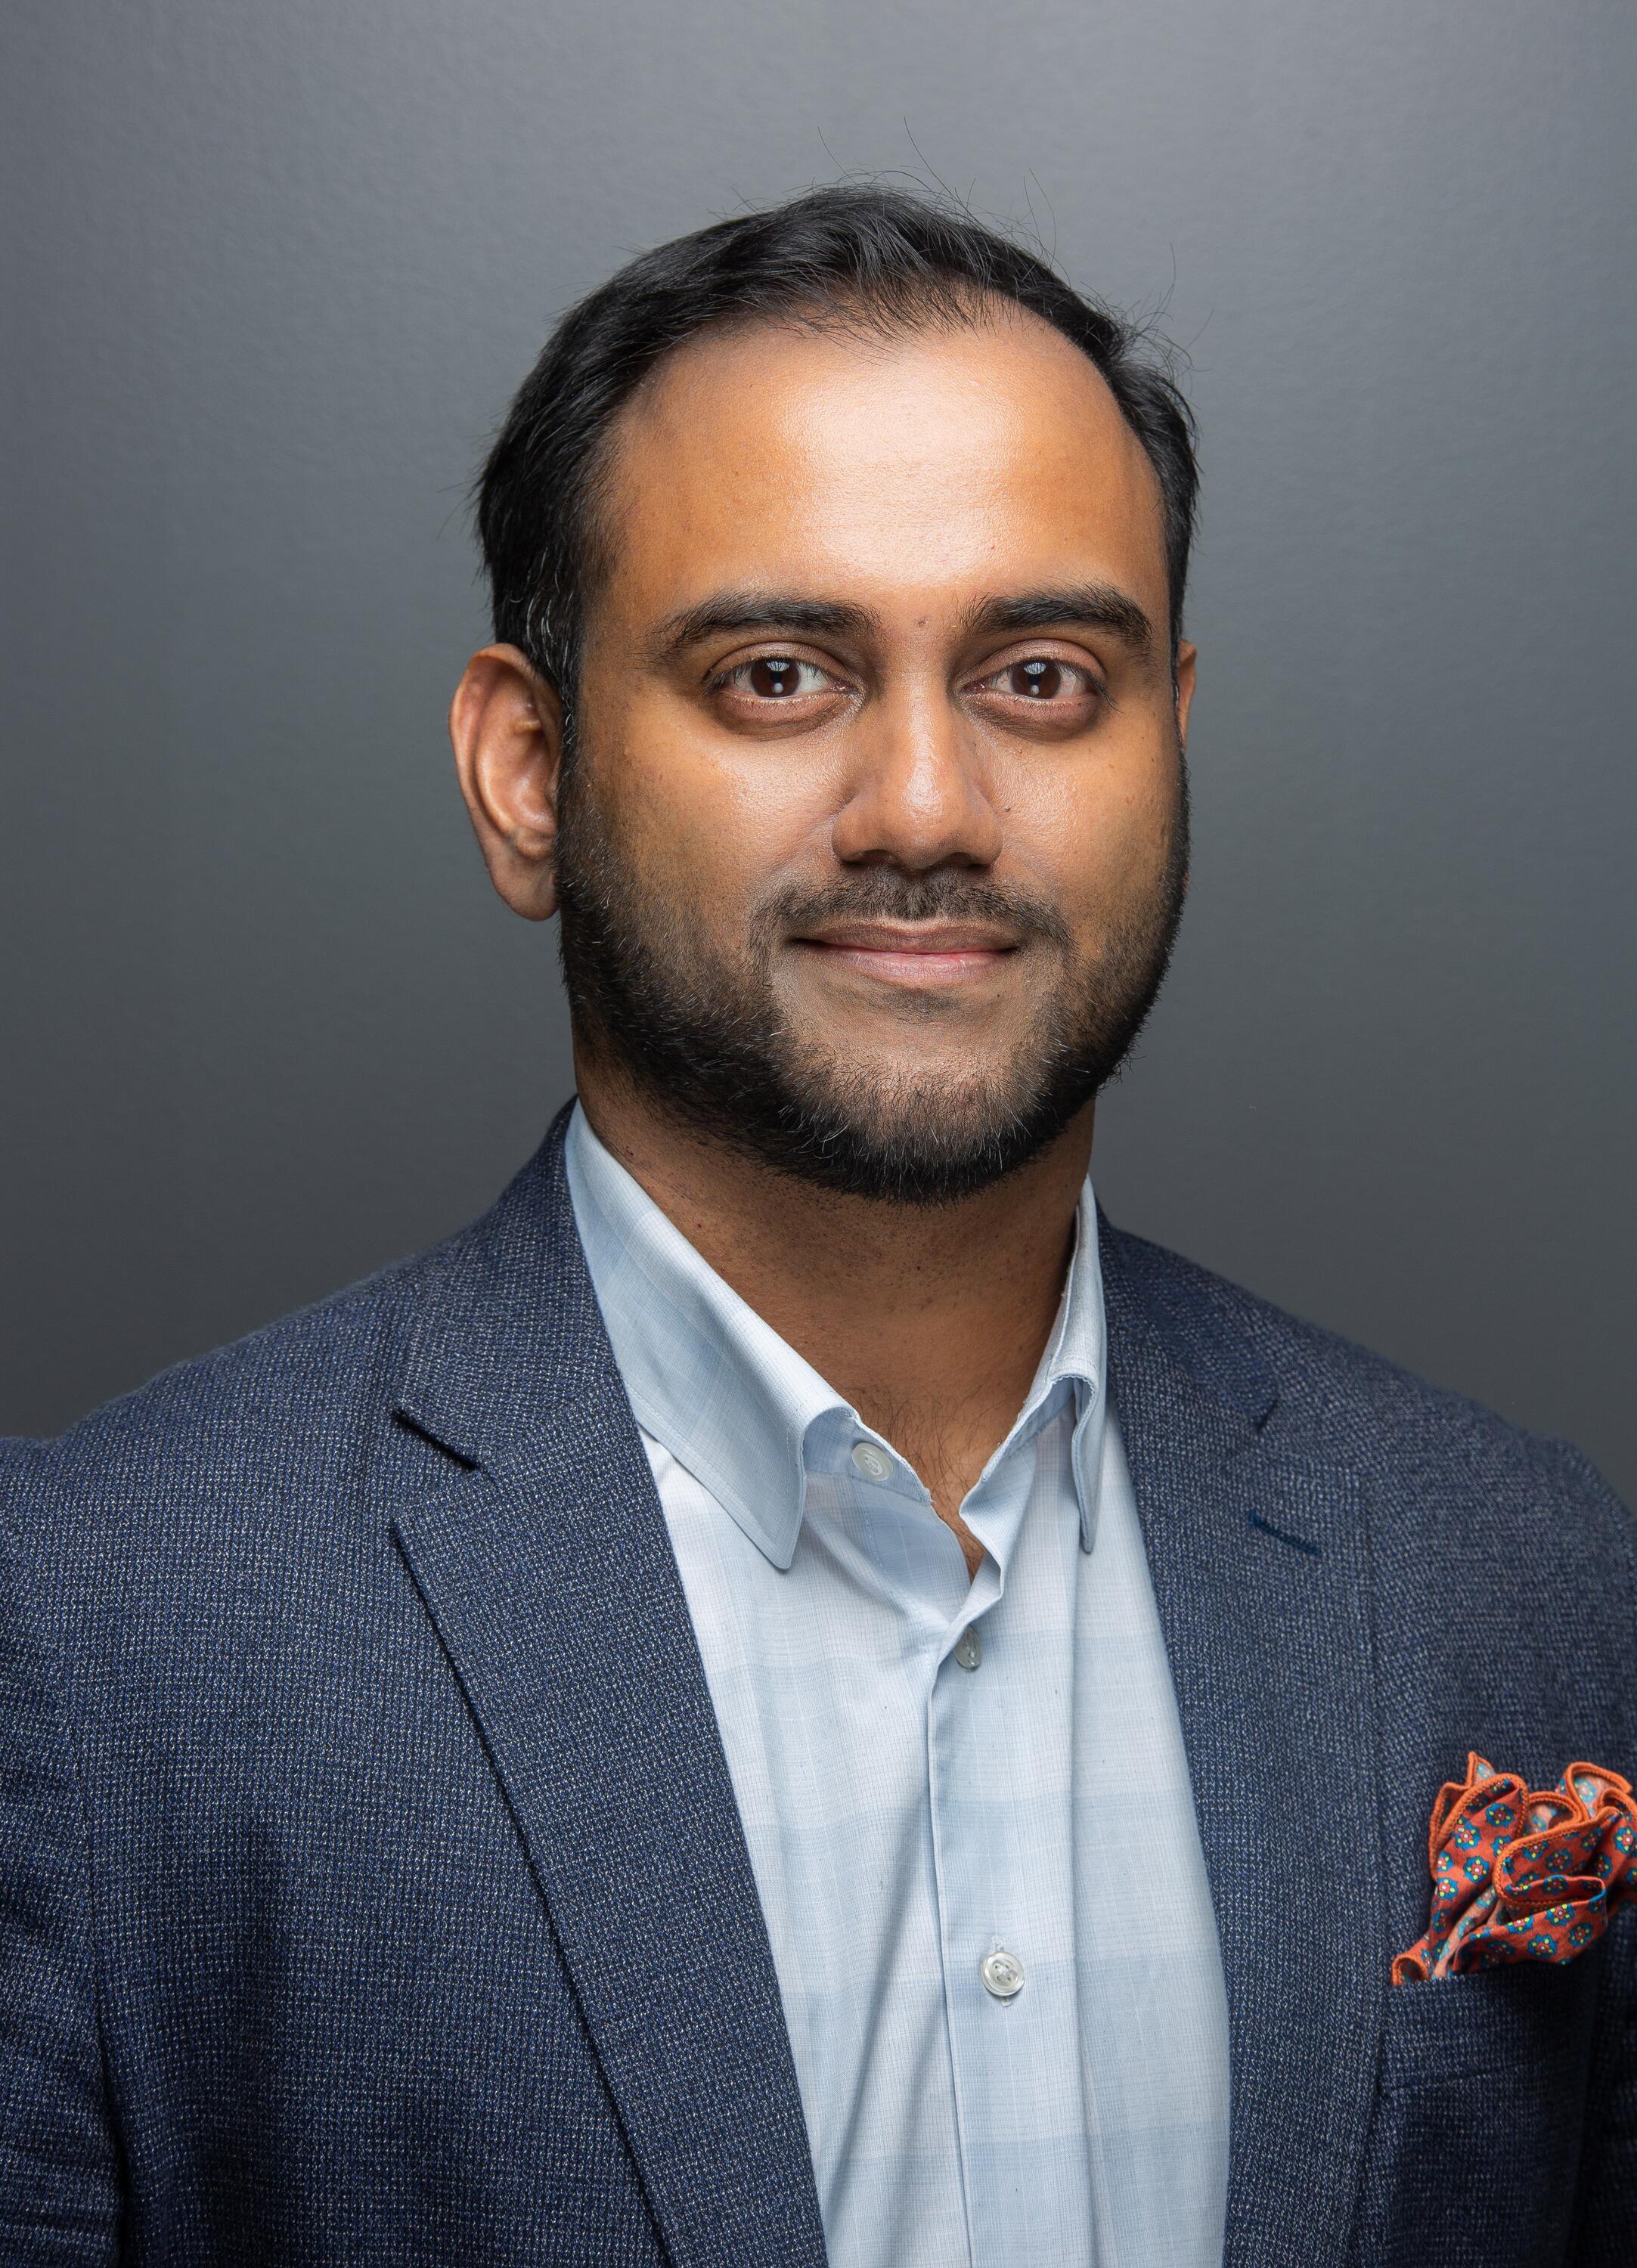 Travis Ratnam (BASc ’06, Electrical Engineering), Co-Founder and CEO of Knowledgehook